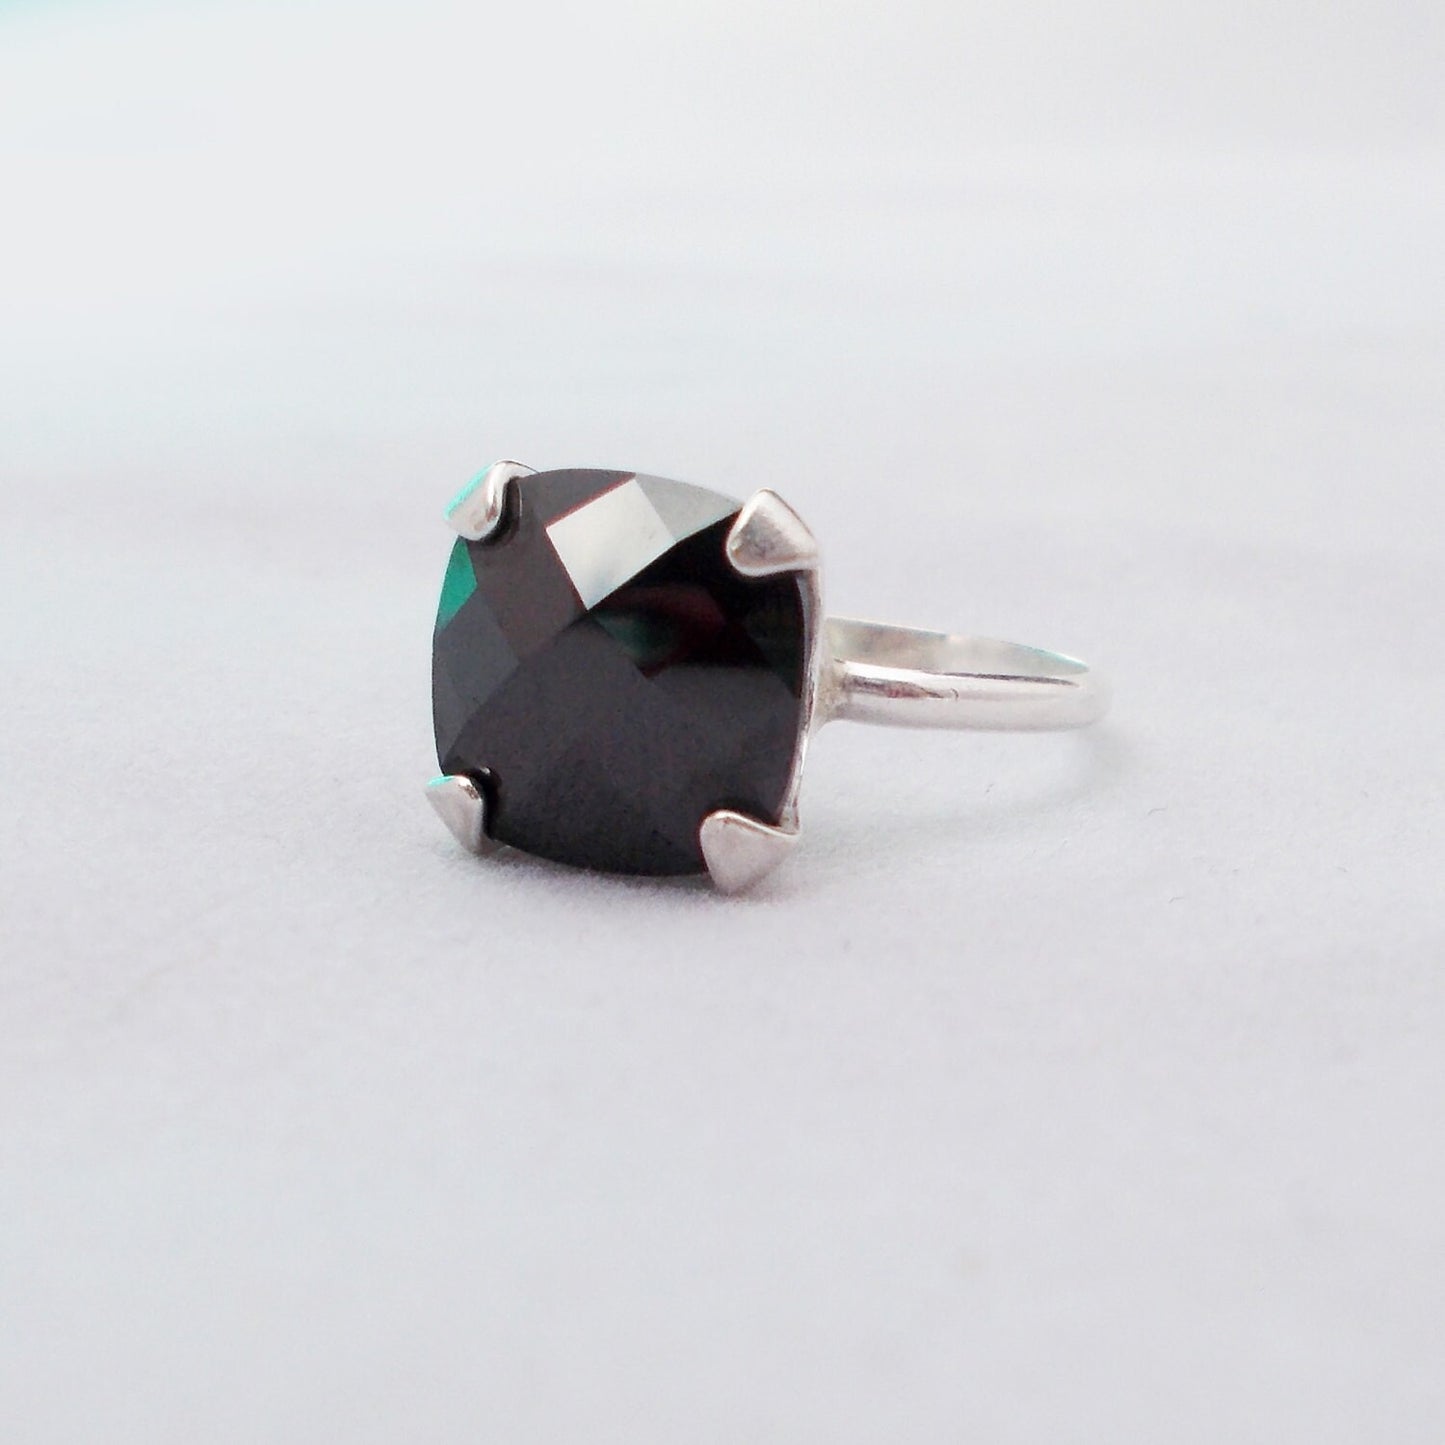 Sterling Silver and Black Ring - Cushion Cut CZ - Sterling Silver Filled Ring